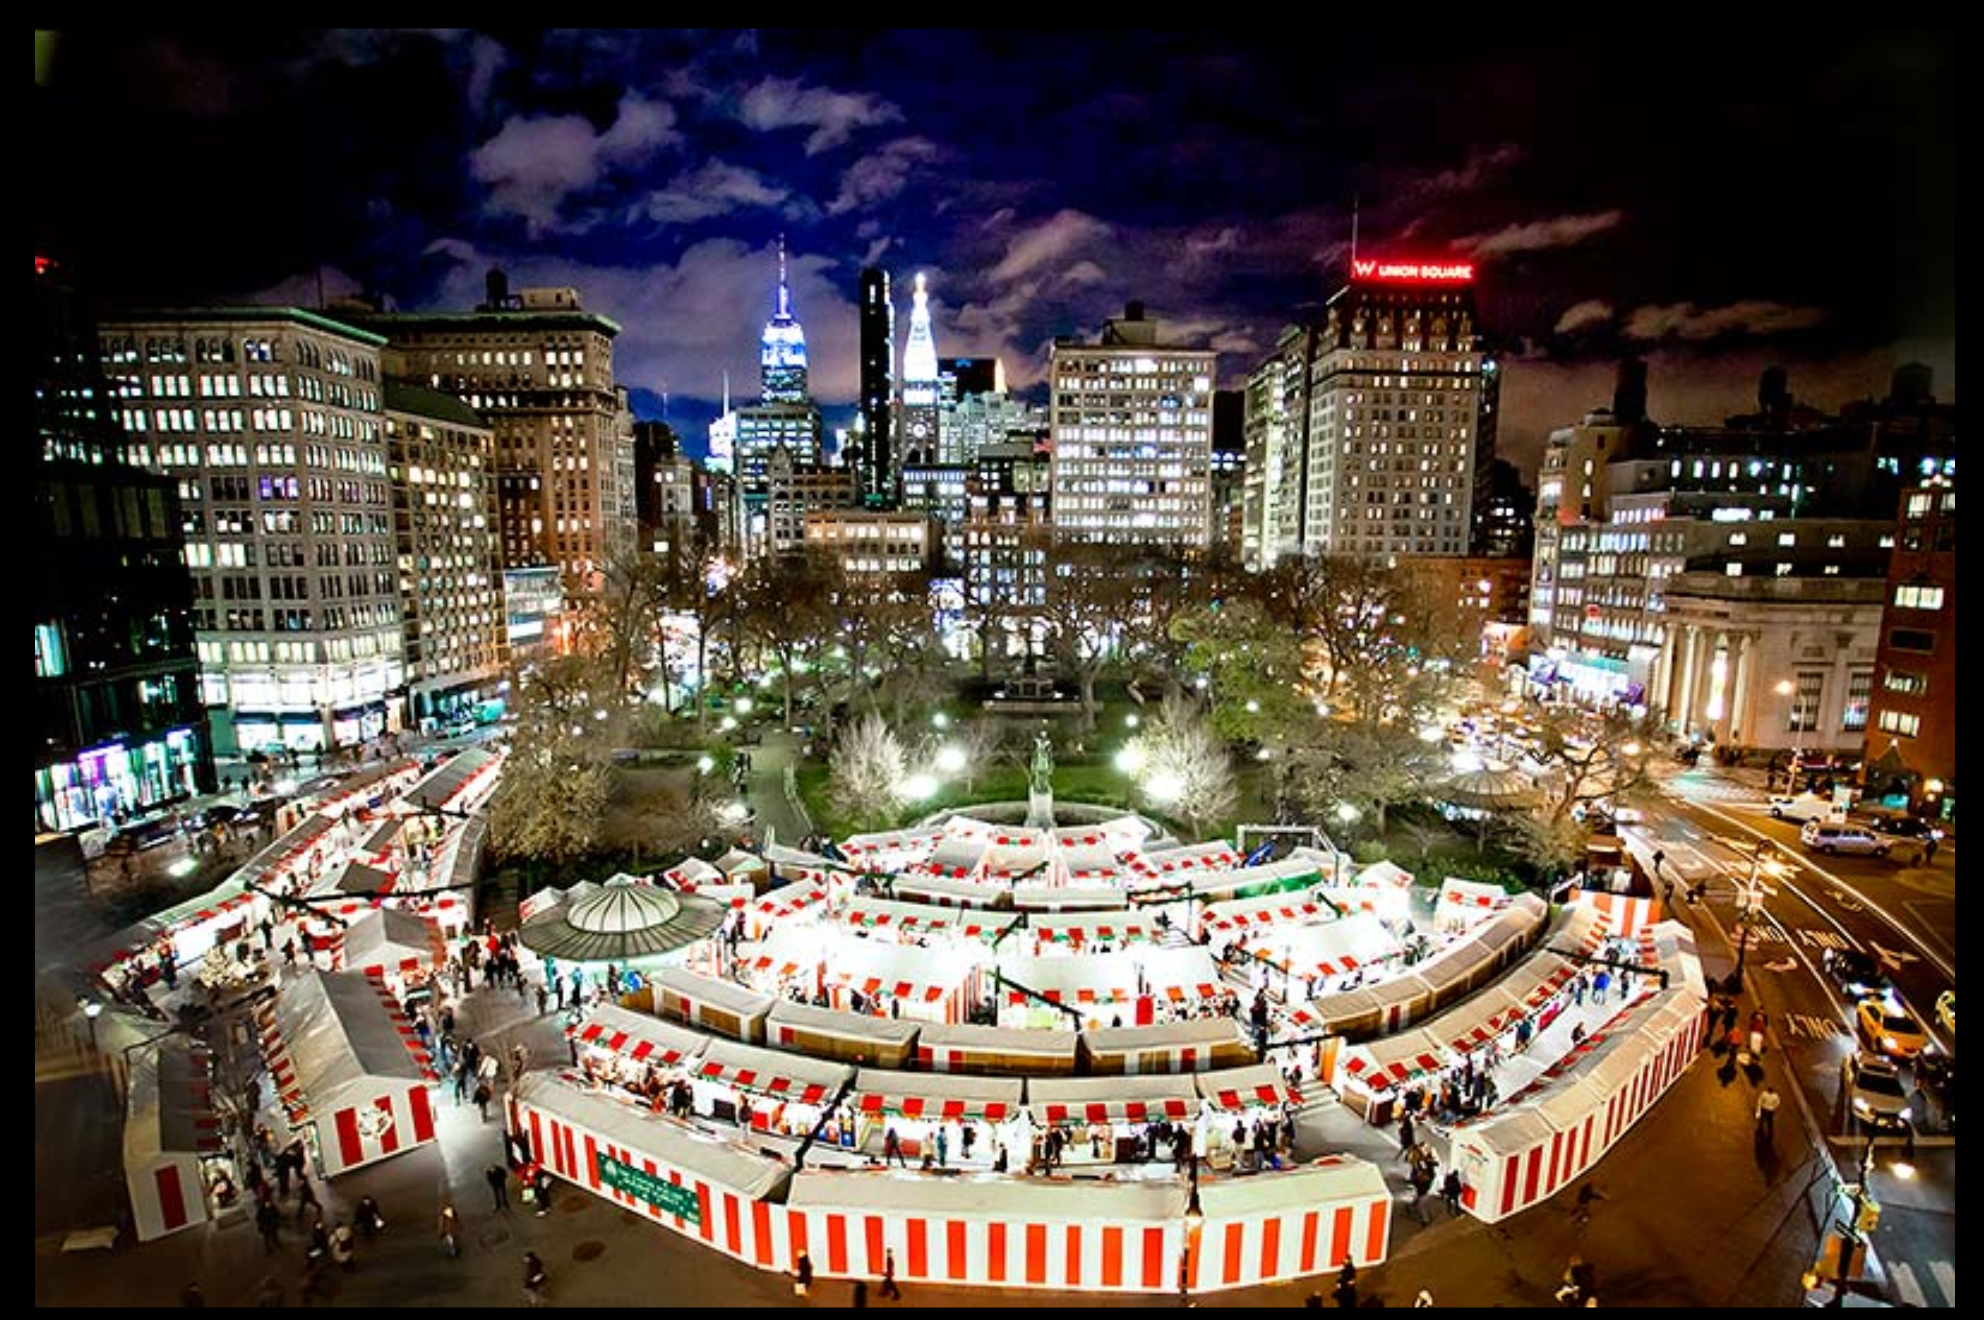 A view of the Union Square holiday market